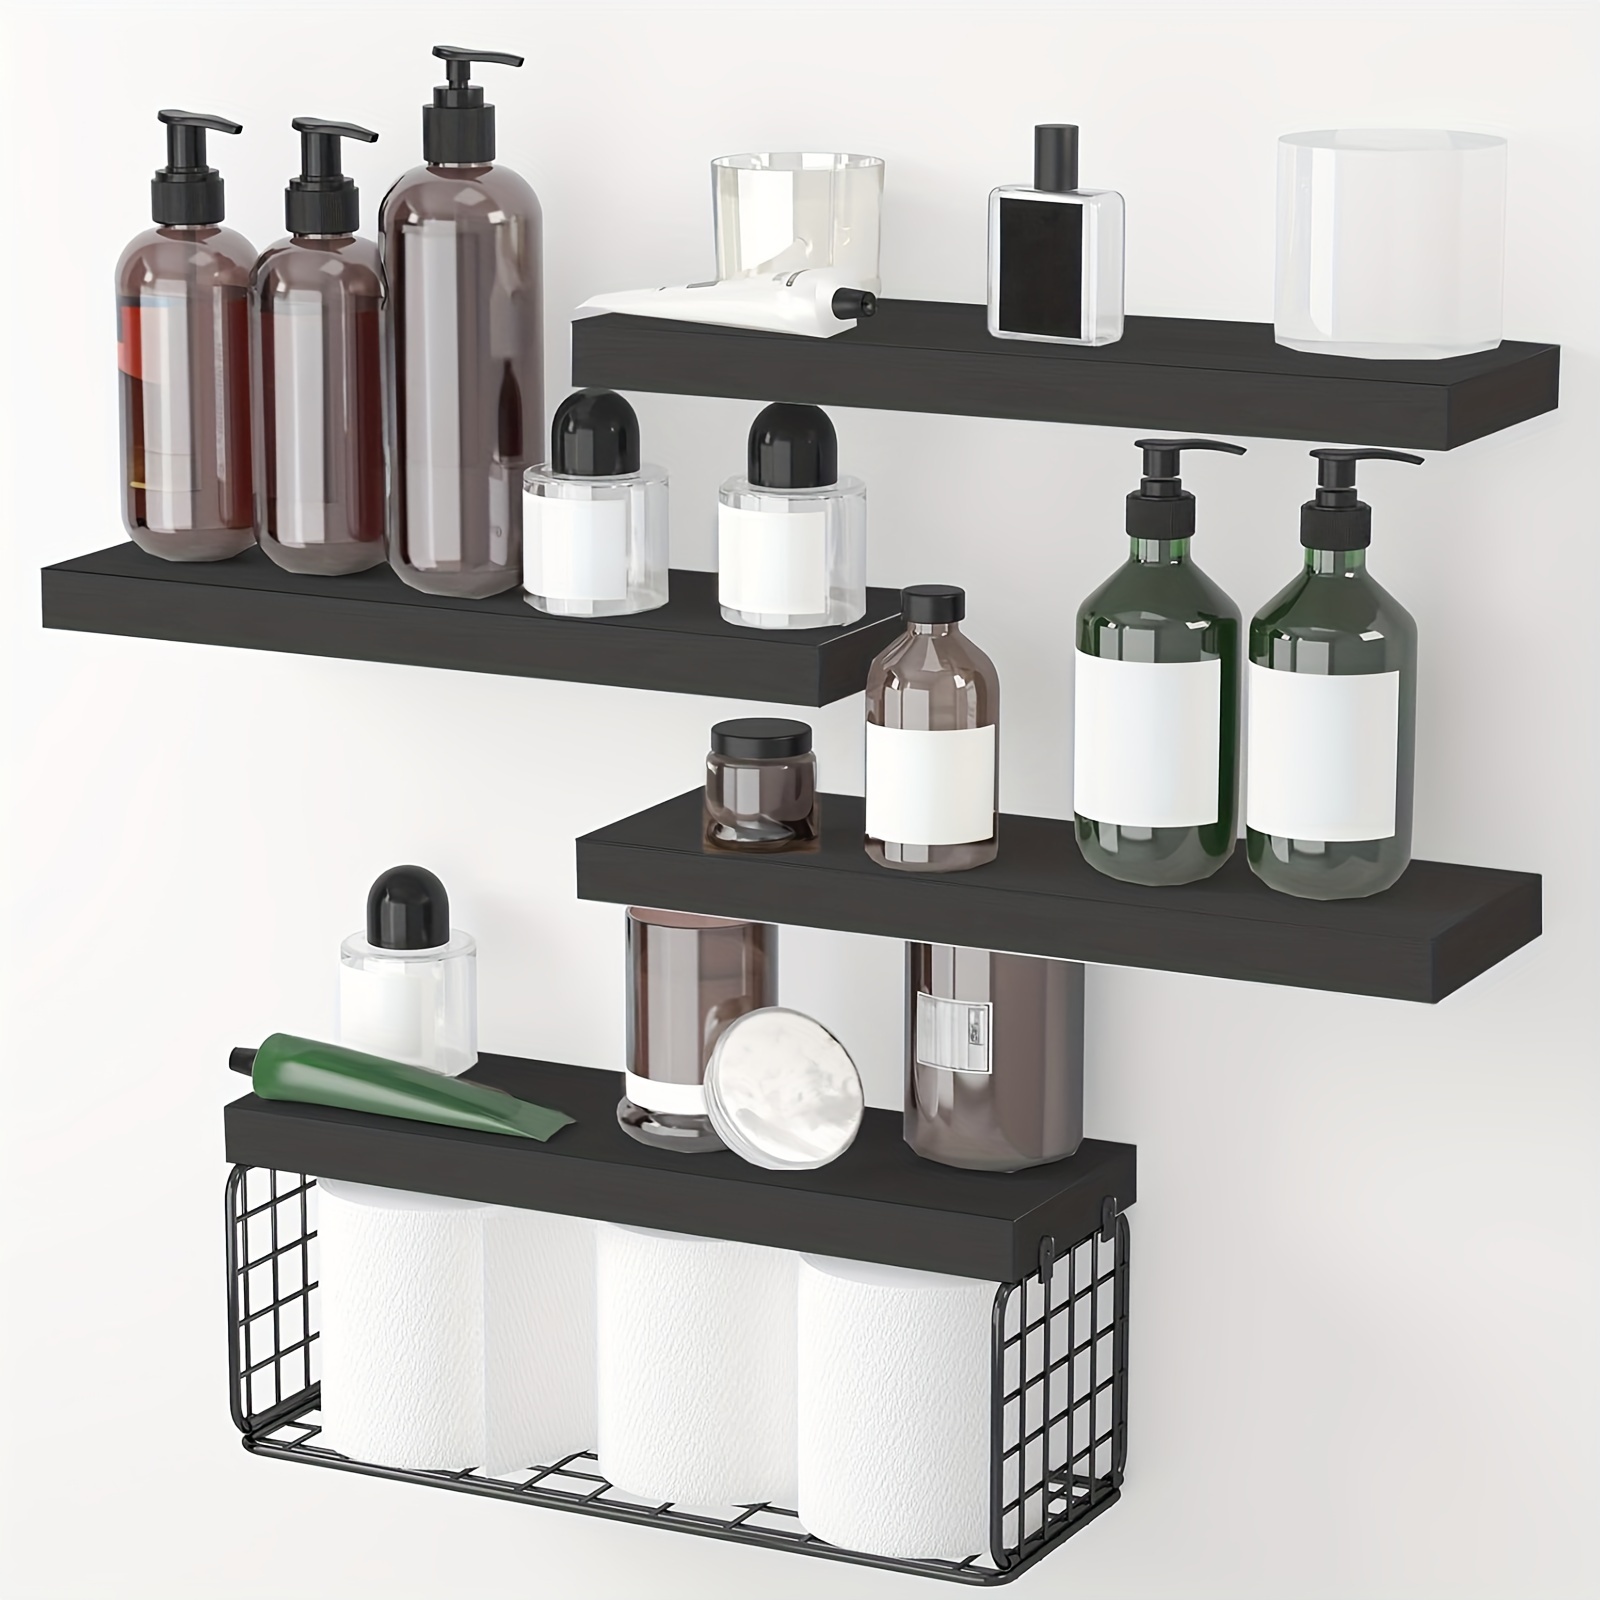 

Toiletries And Towels Shelves, Black, Bathroom Floating Shelves, 4+1 Tier 15.7in Rustic Wall Shelf Over Toilet With Invisible Brackets, Farmhouse Wall Decor